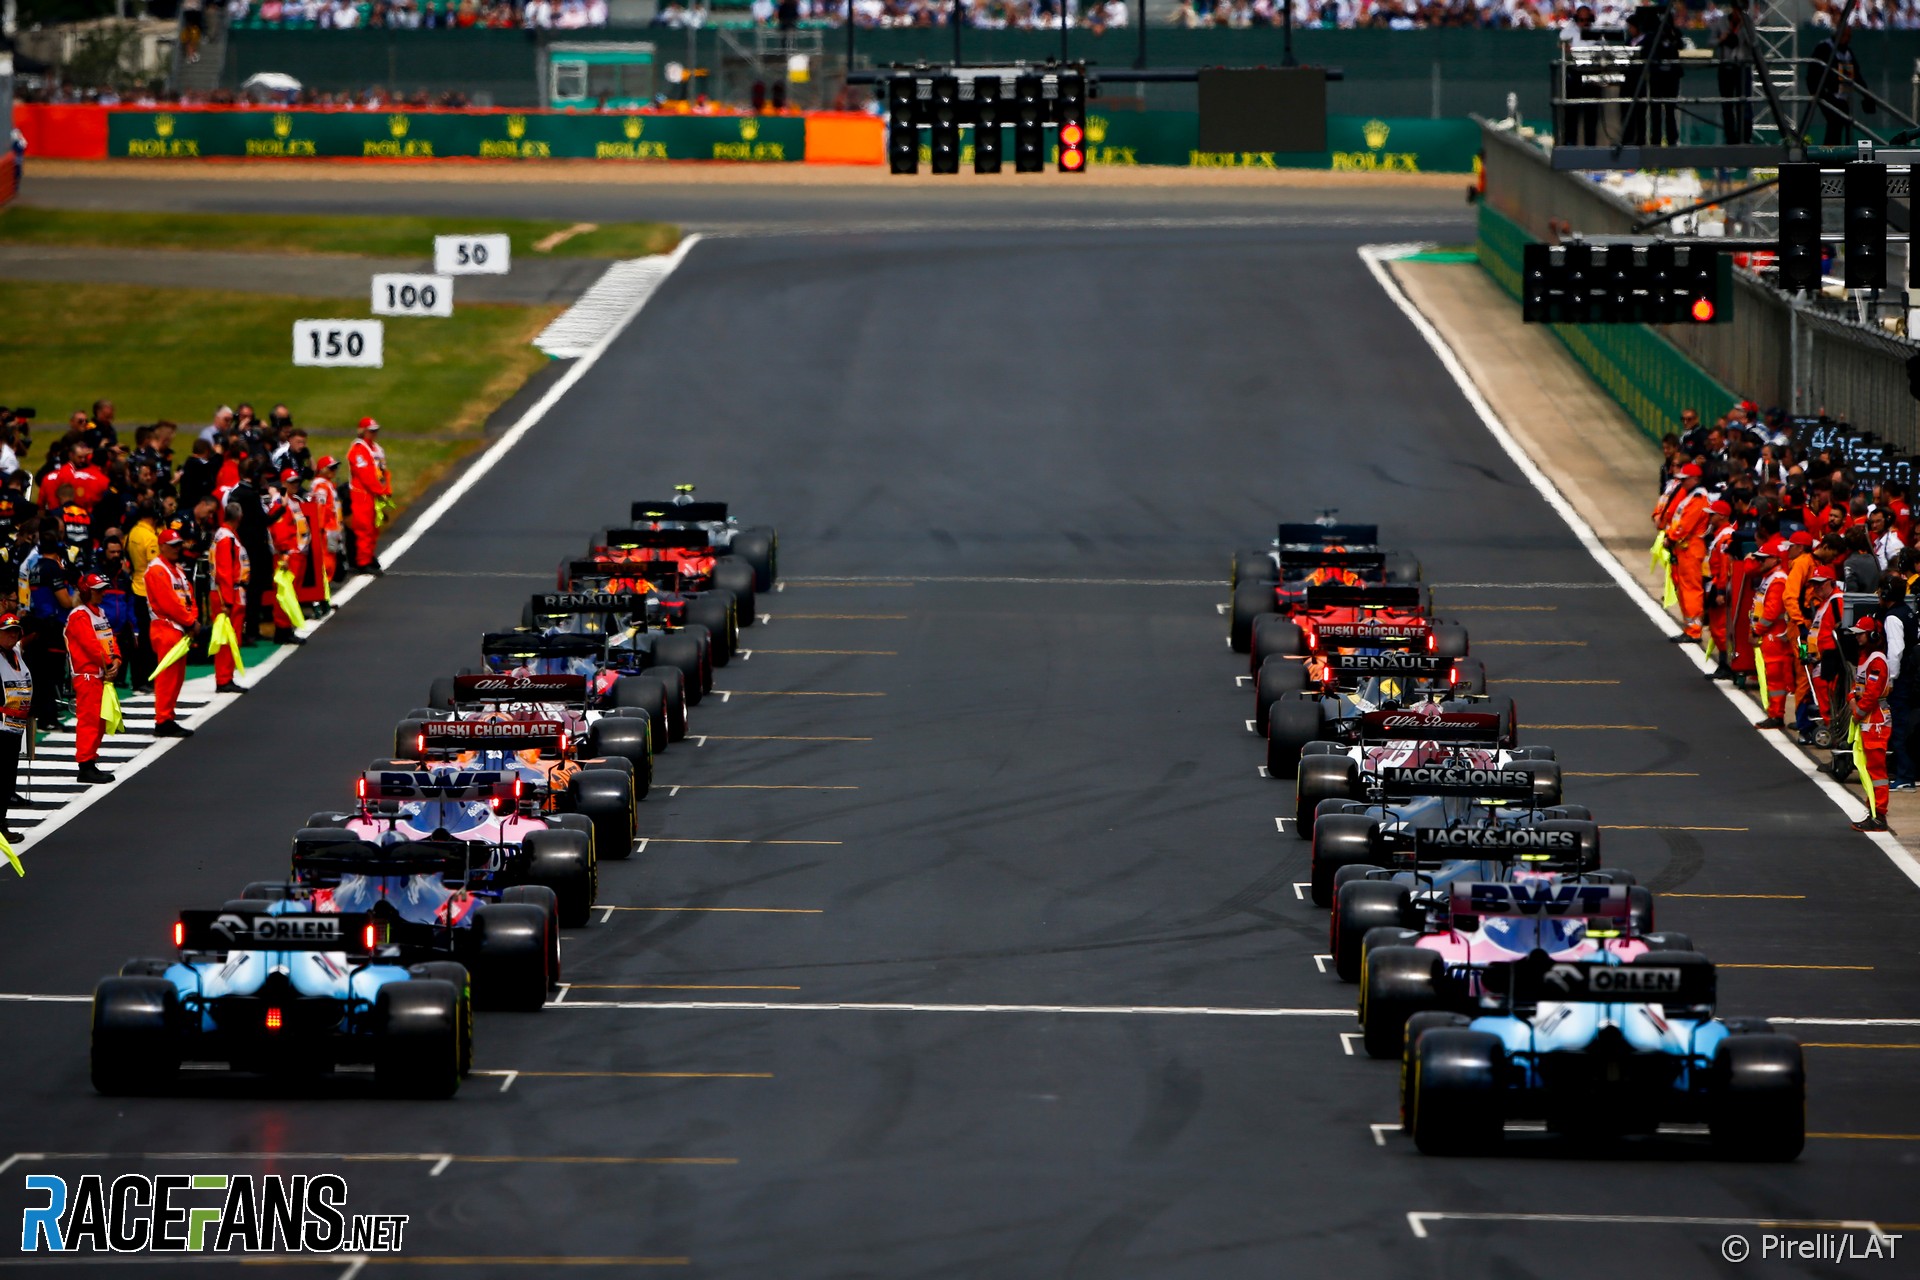 F1 says it has “no serious discussions” with any potential new teams